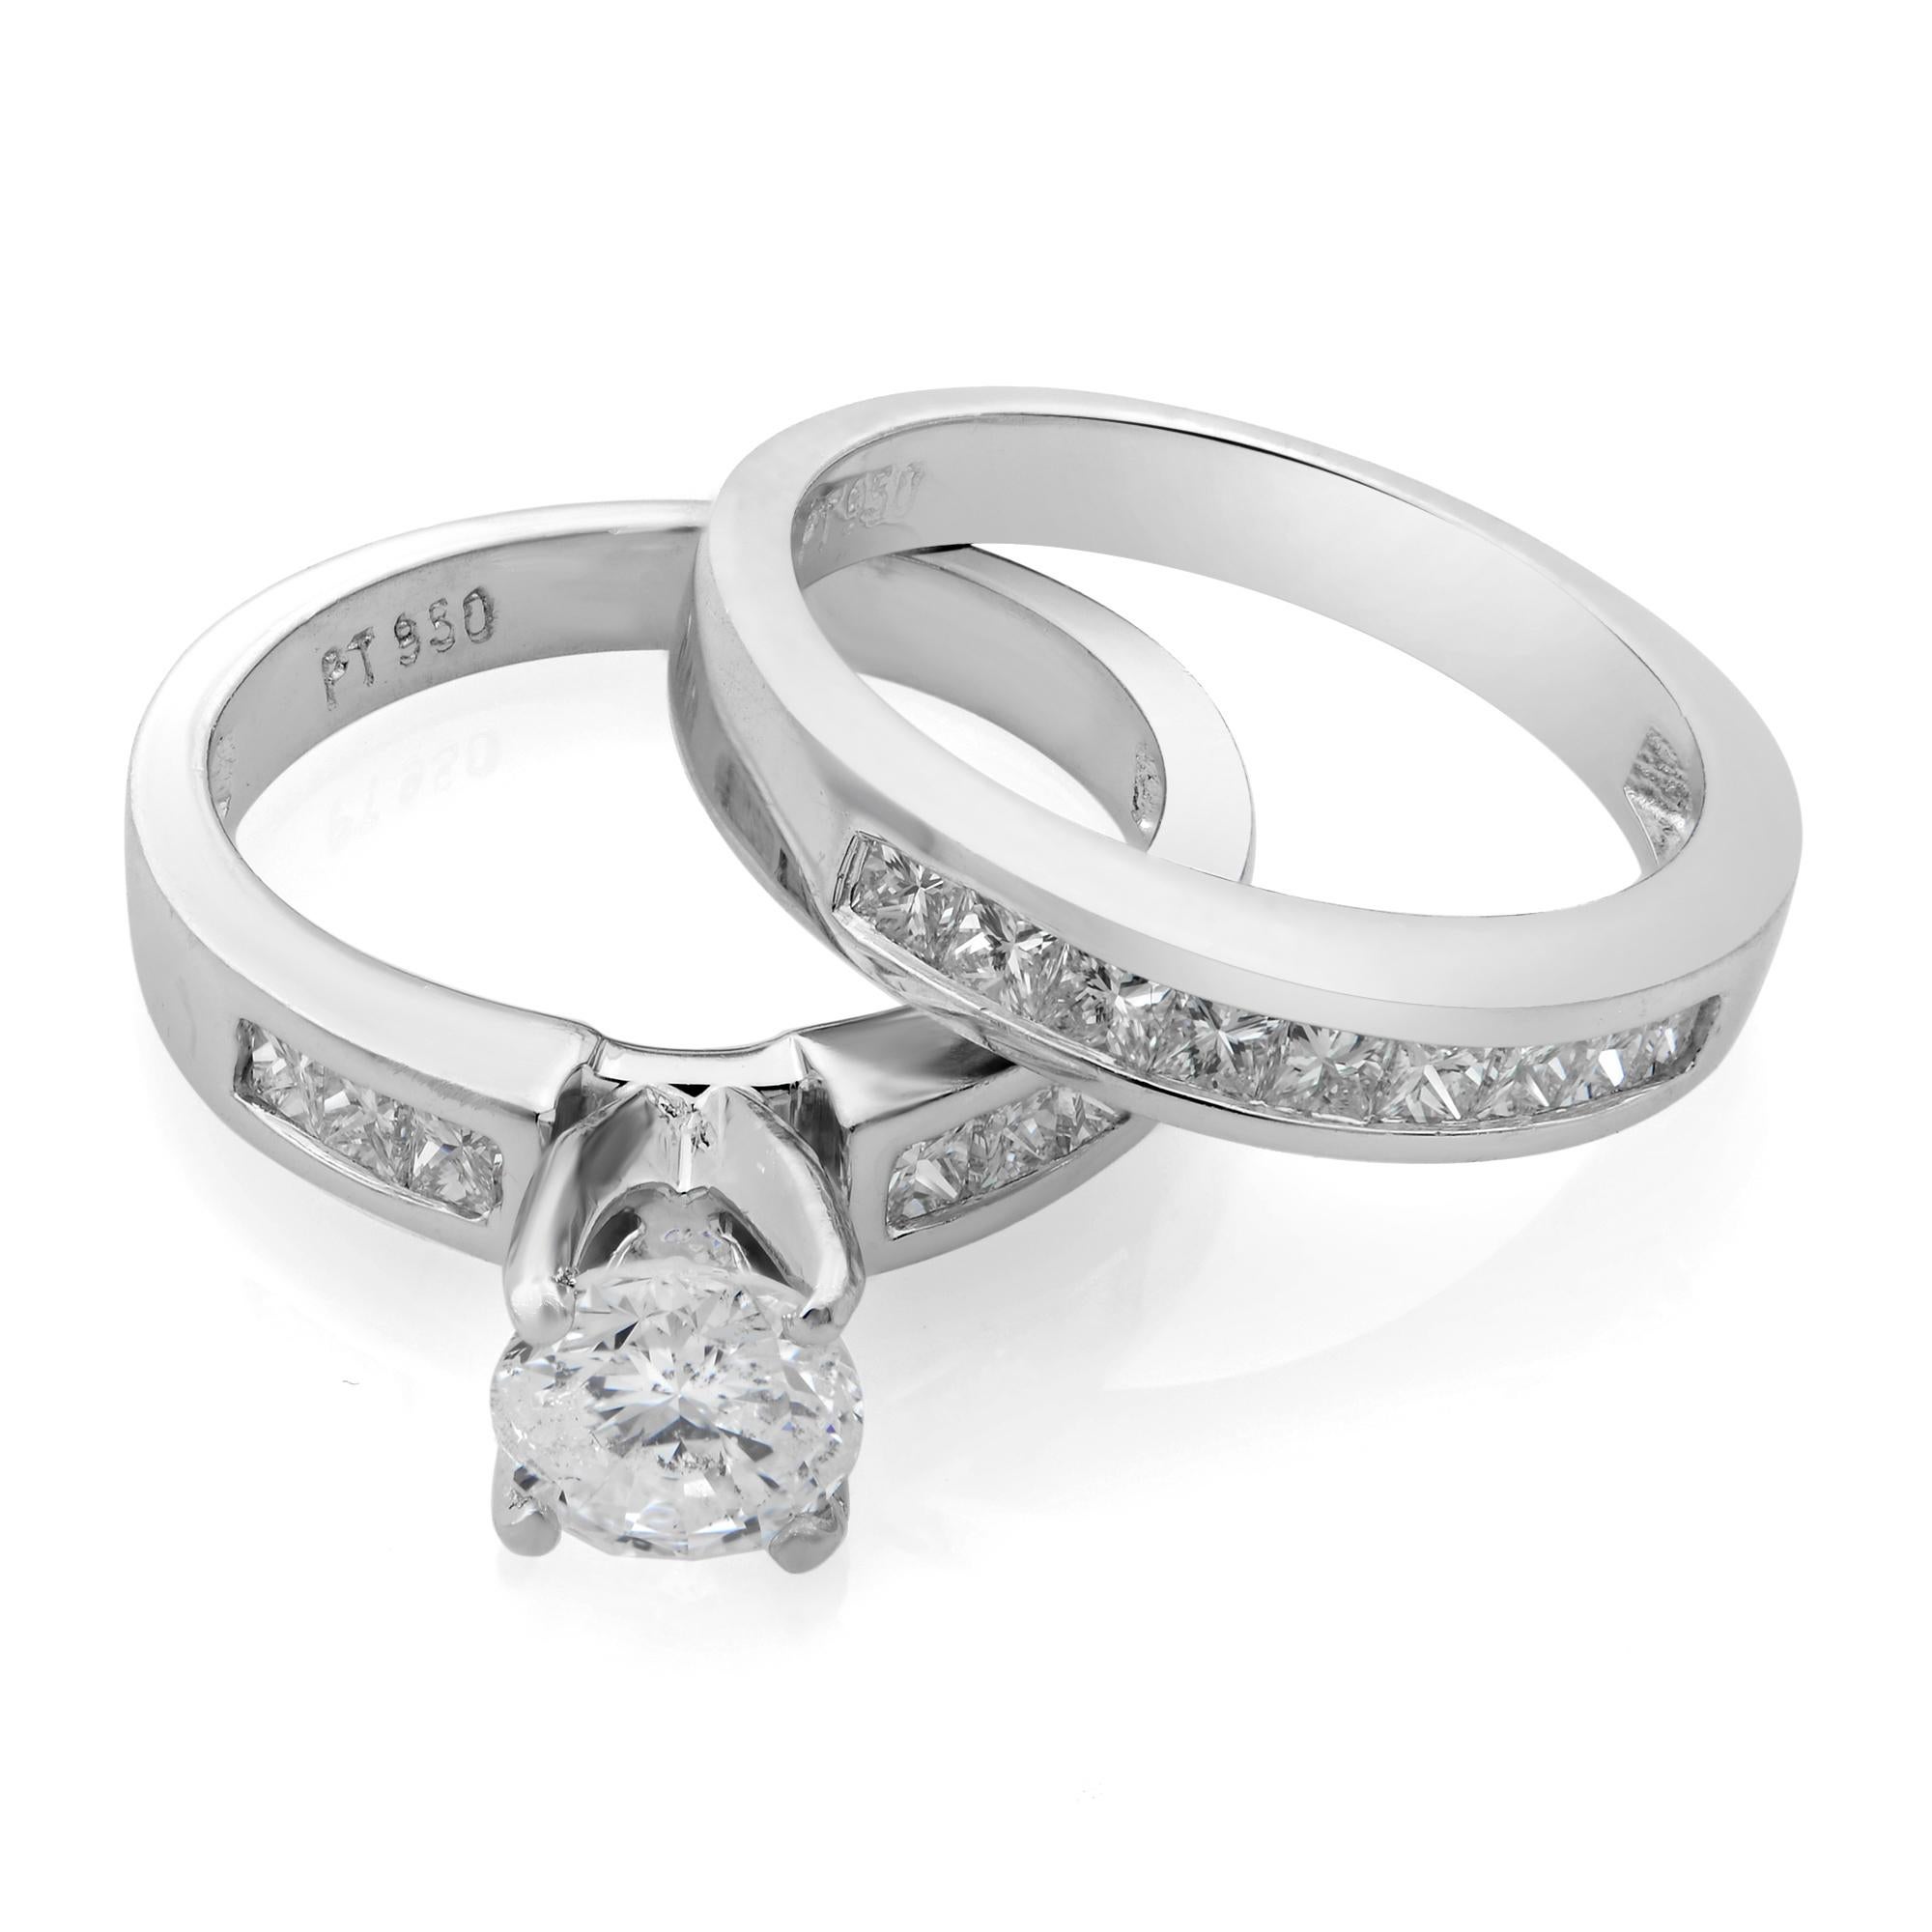 This beautiful bridal ring set is a combination of an engagement ring and a wedding band. Simple and chic, it is a beautiful reminder of your timeless love. Set in 14k white gold, the classic engagement ring is encrusted with a center round